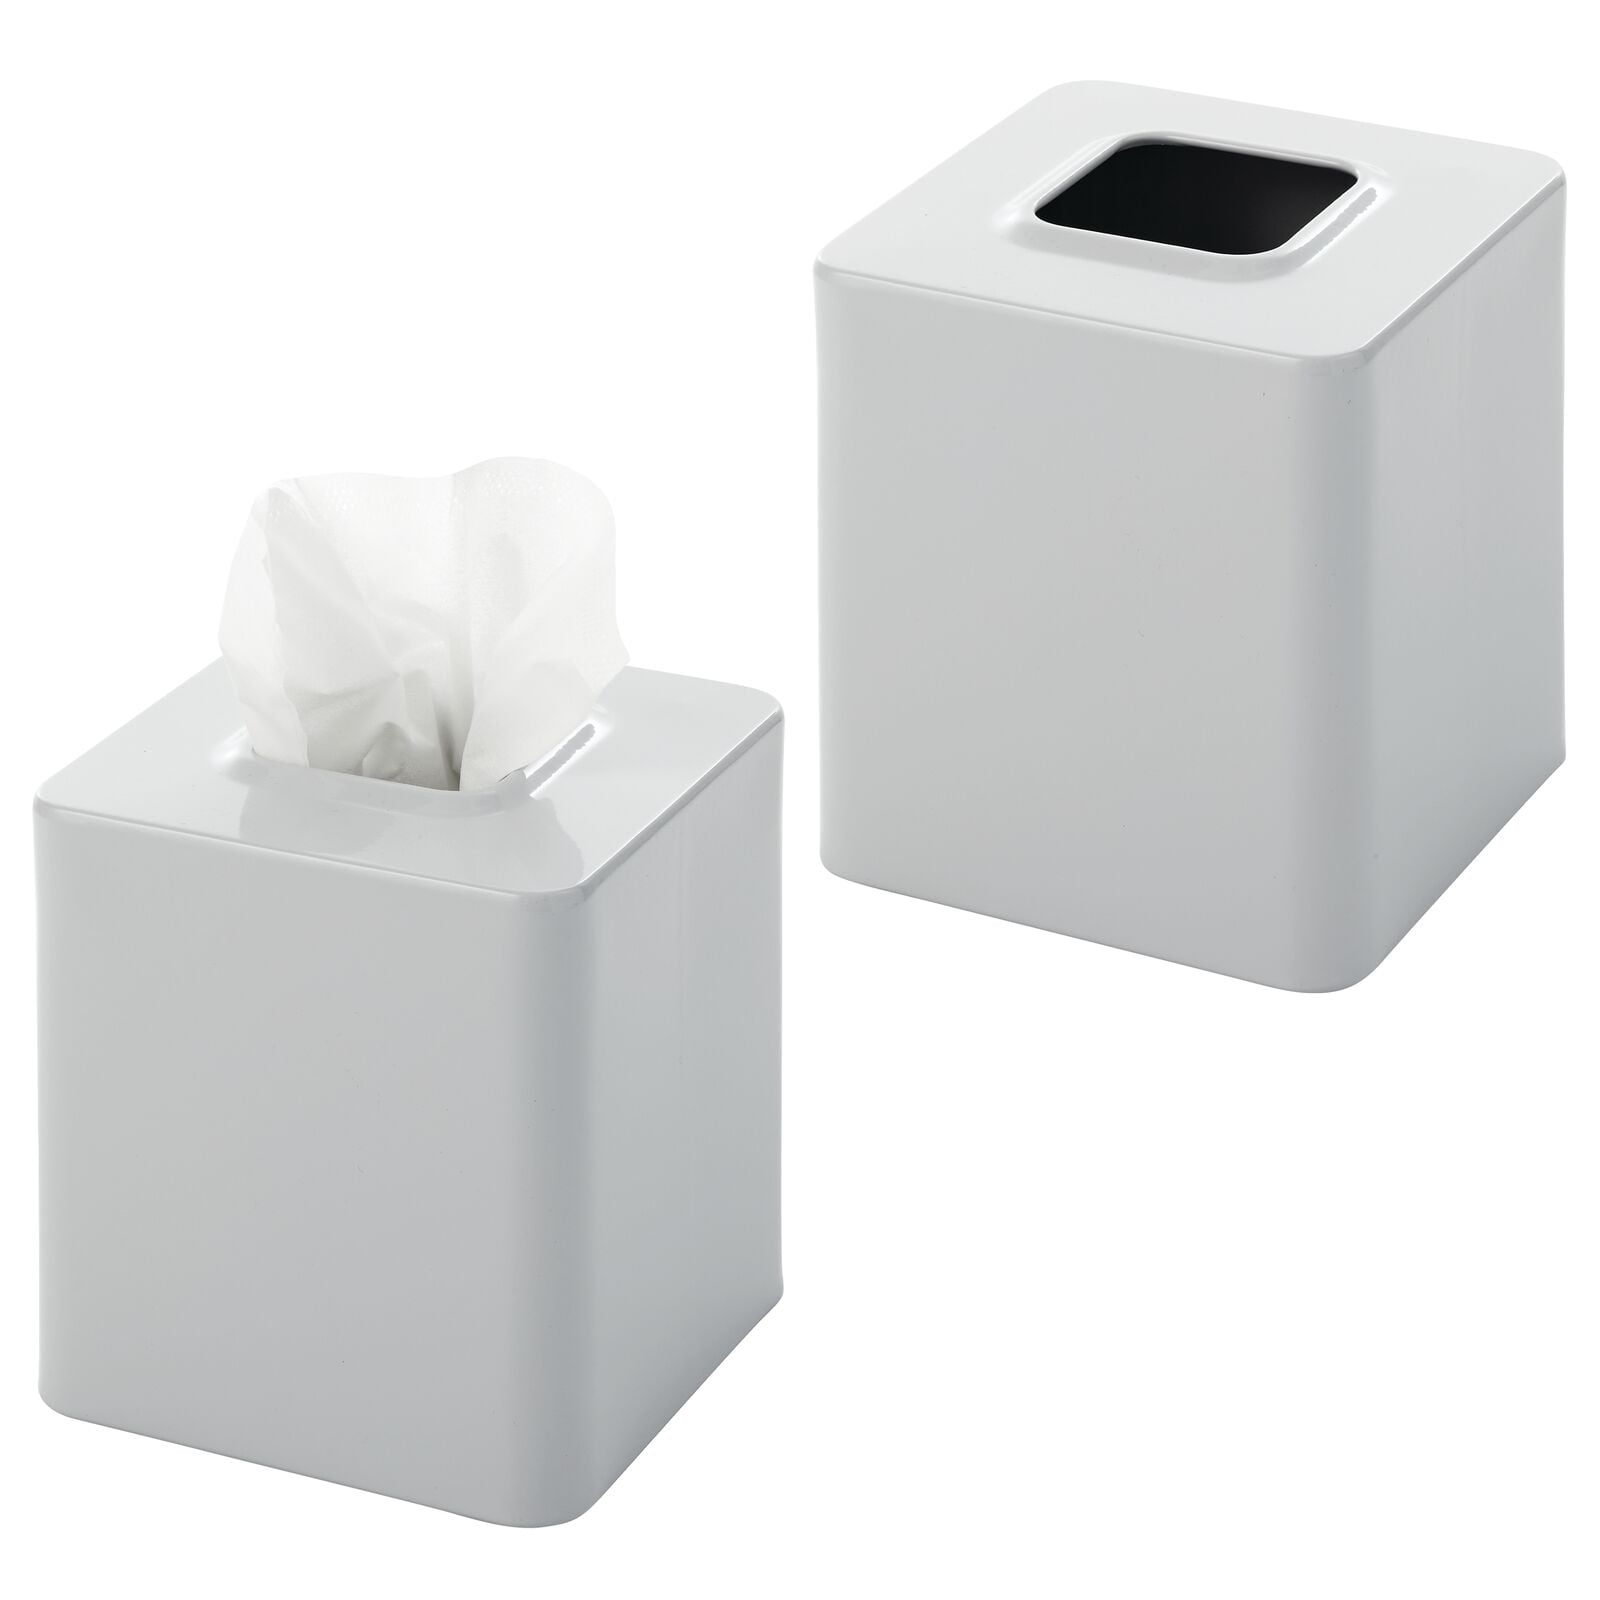 Details about   mDesign Plastic Square Facial Tissue Box Cover Holder for Bathroom Bronze 